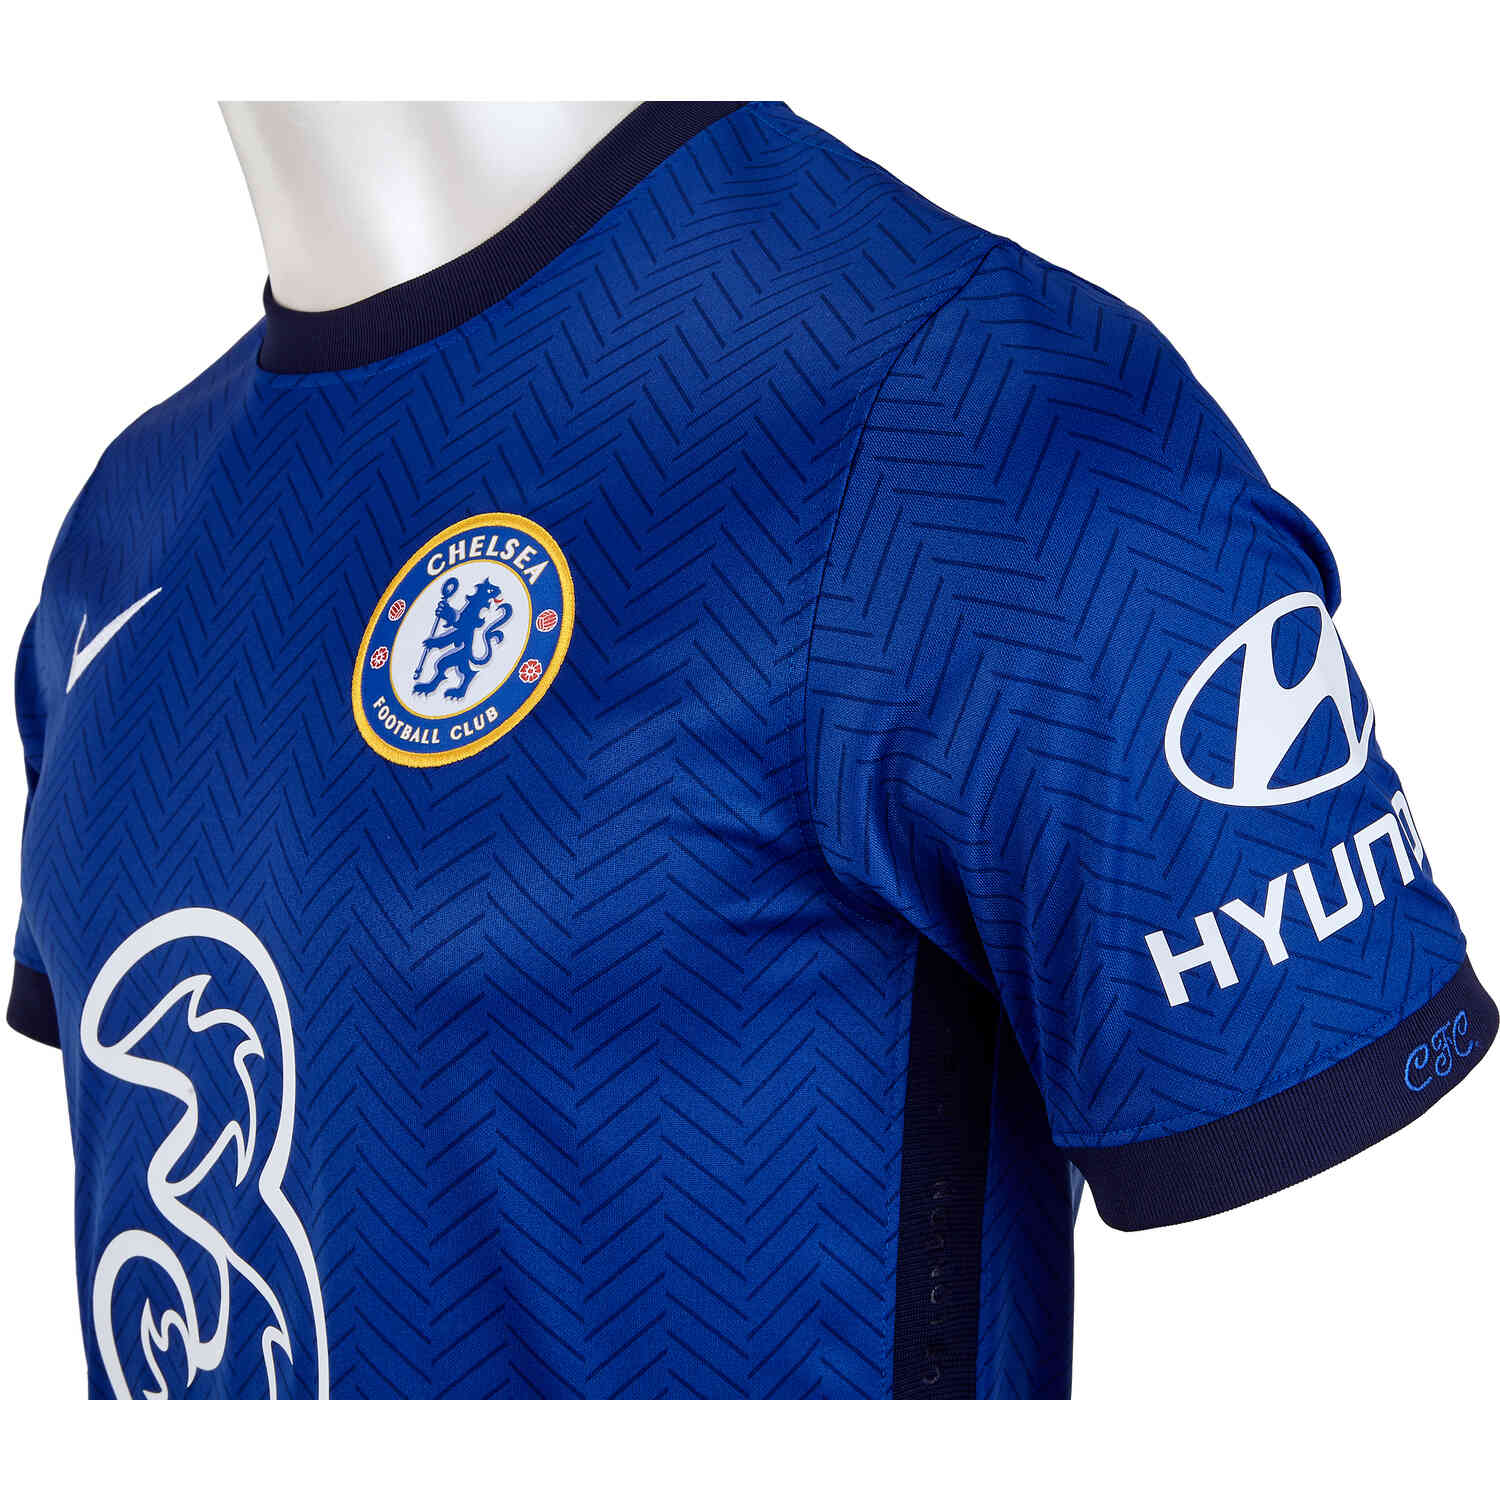 chelsea pulisic jersey youth